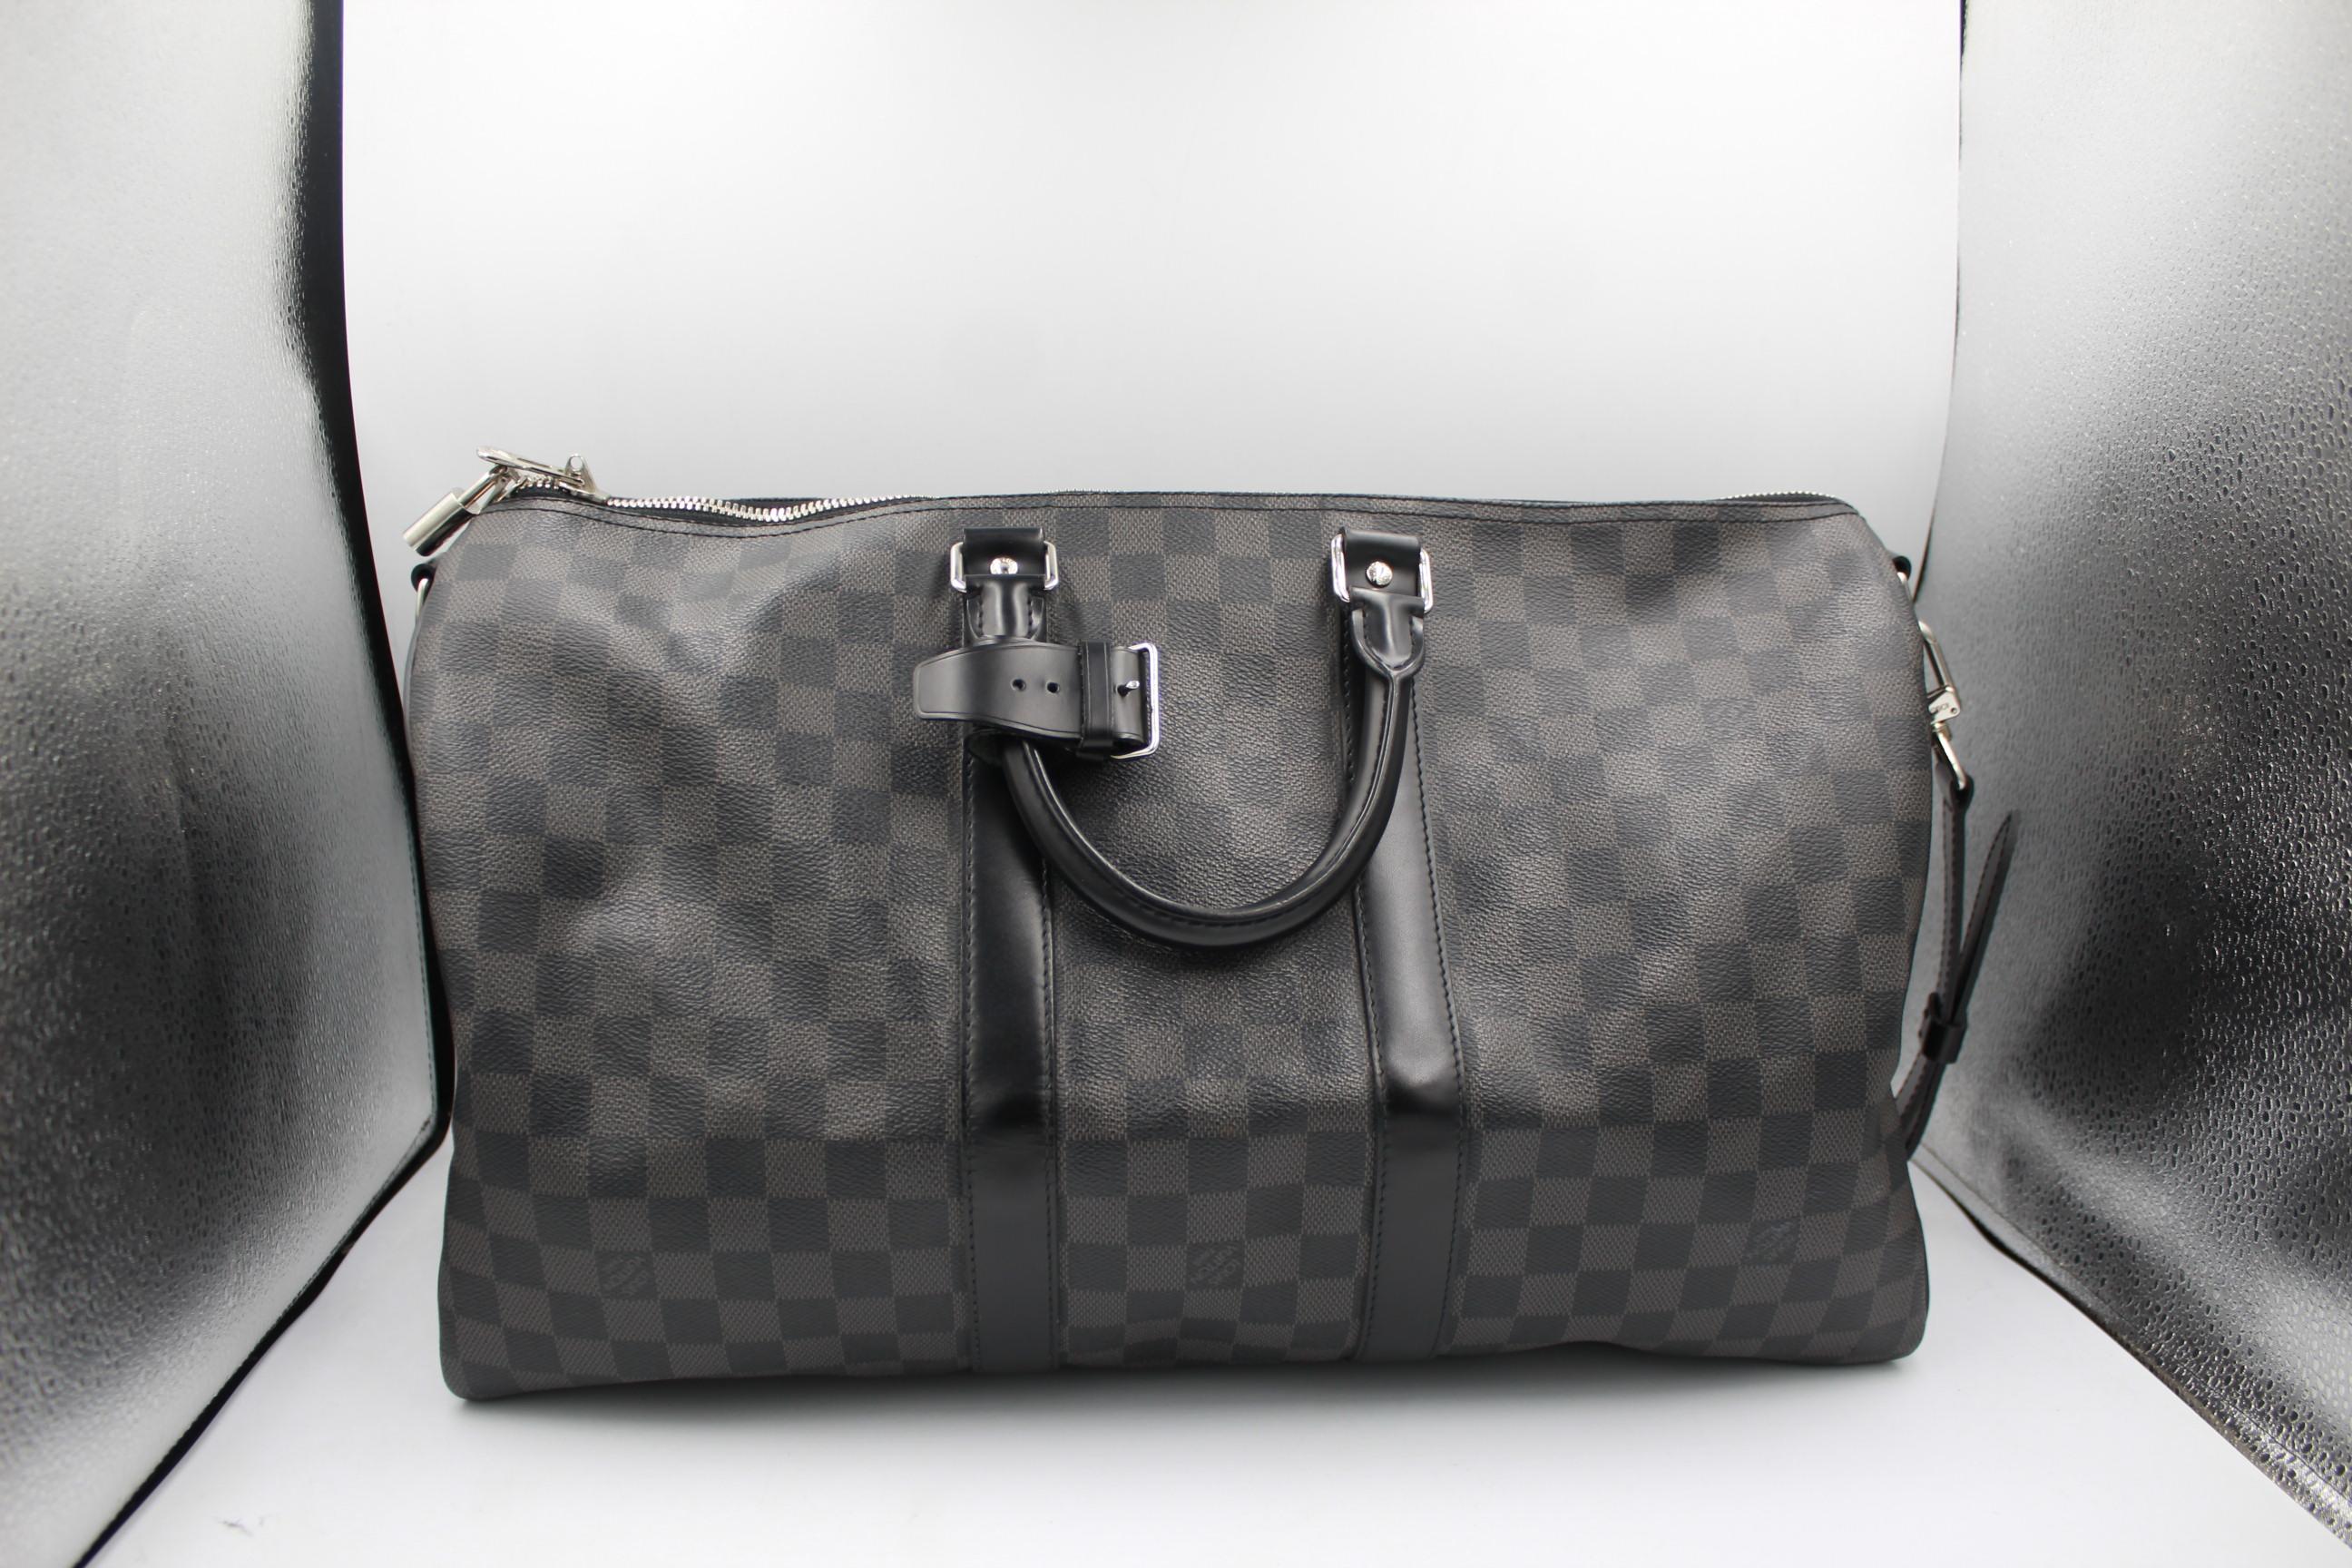 Louis Vuitton Damier Keepall 45
Good conditon 
sold with its adjustable shoulder strap its lock and keys

45cm x 25cm x 20cm